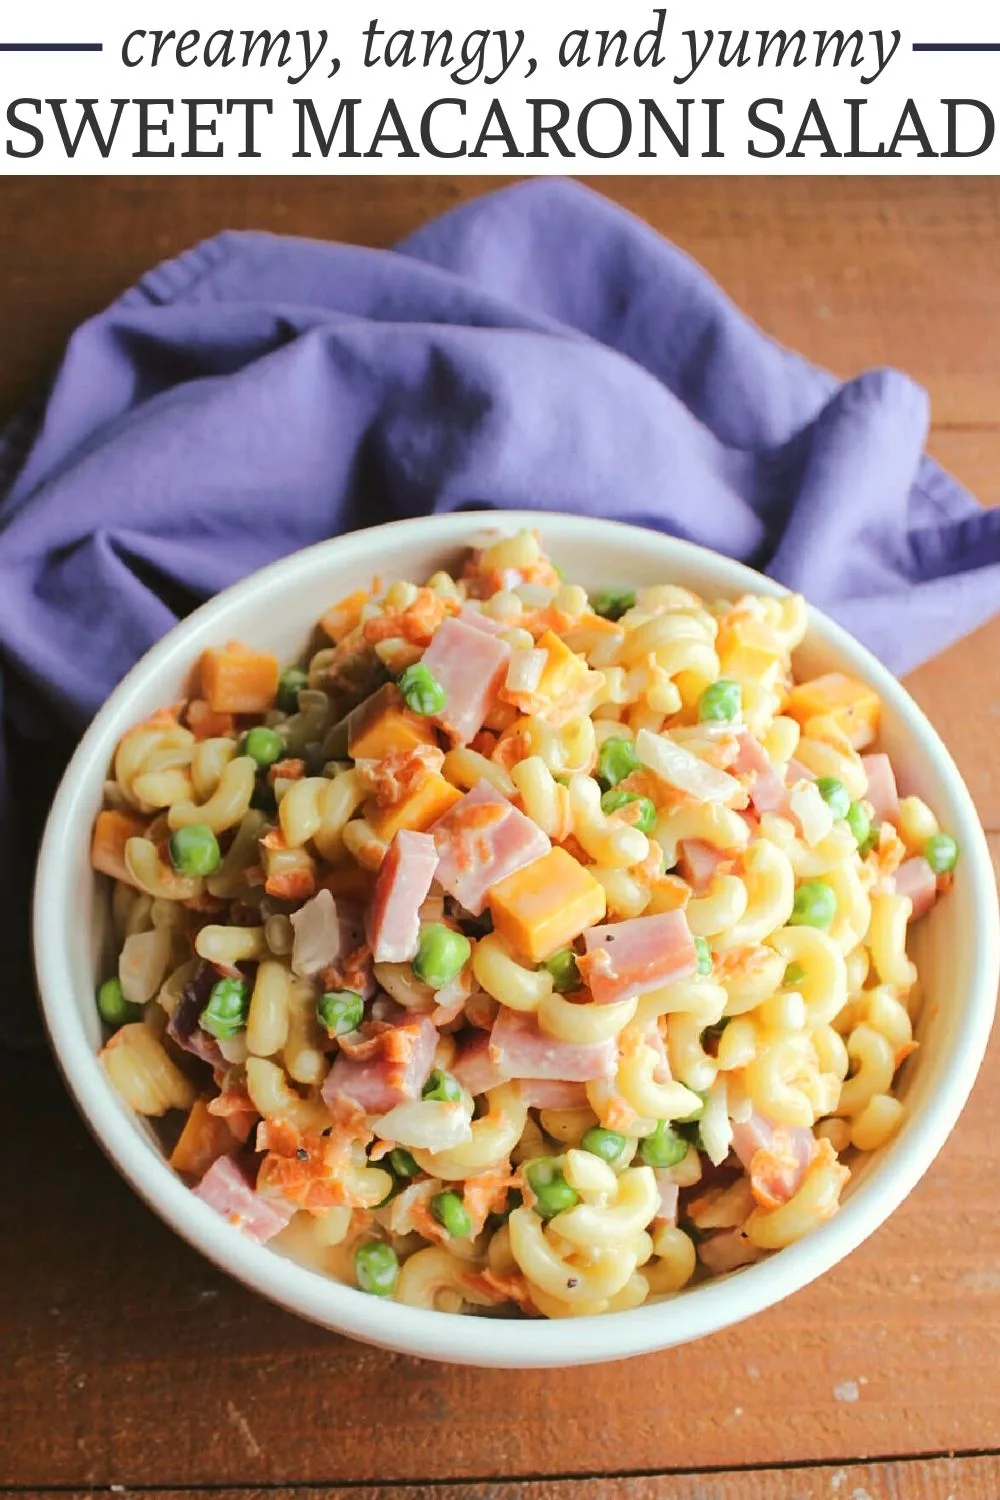 Sweet macaroni salad is a perfect side dish for barbecues, family reunions, potlucks, and more. It also makes a great simple lunch. Feel free to experiment with adding your favorite vegetables and mix-ins.